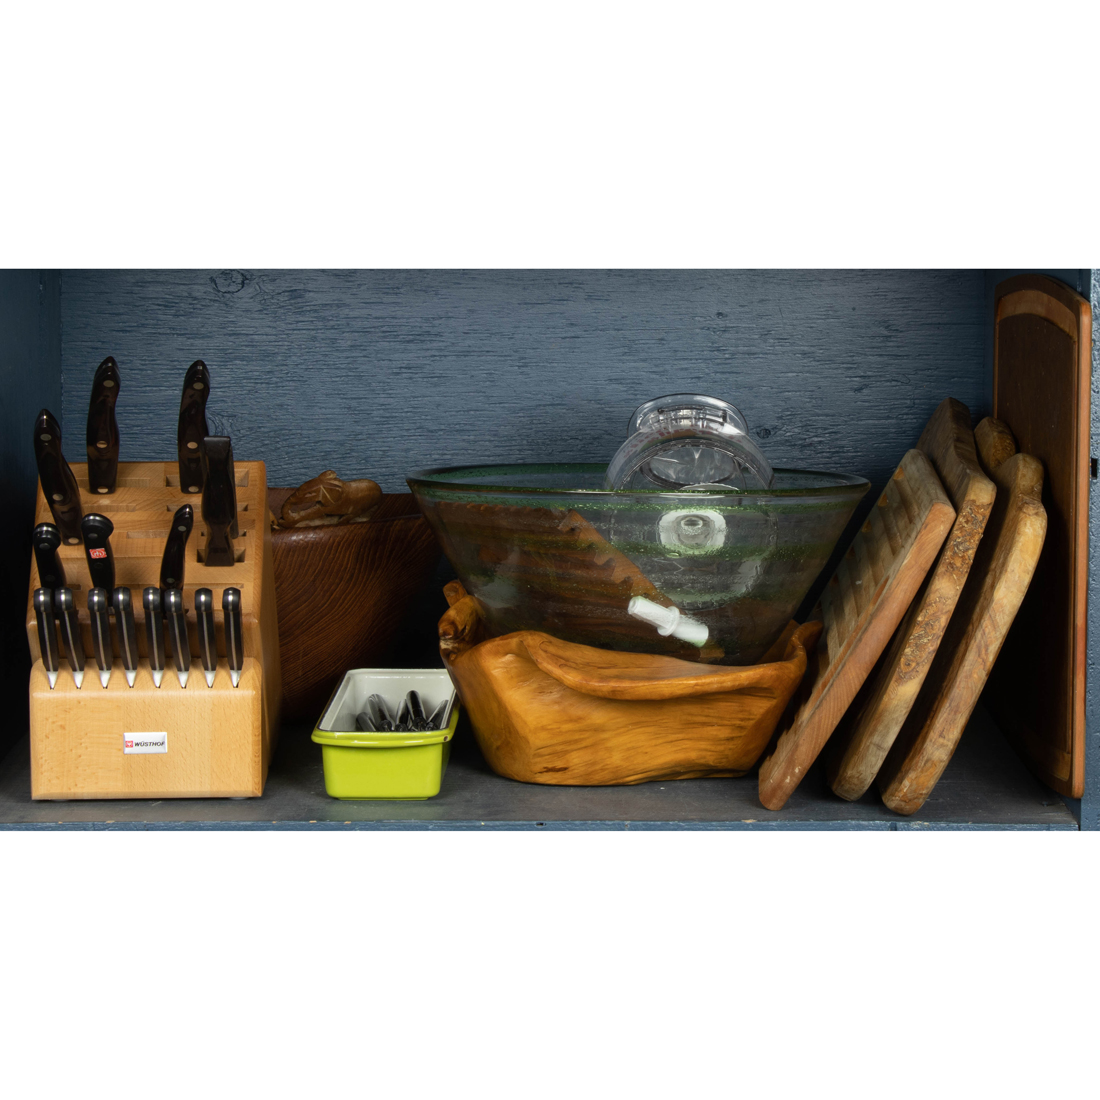 TWO SHELVES OF KITCHENWARE INCLUDING